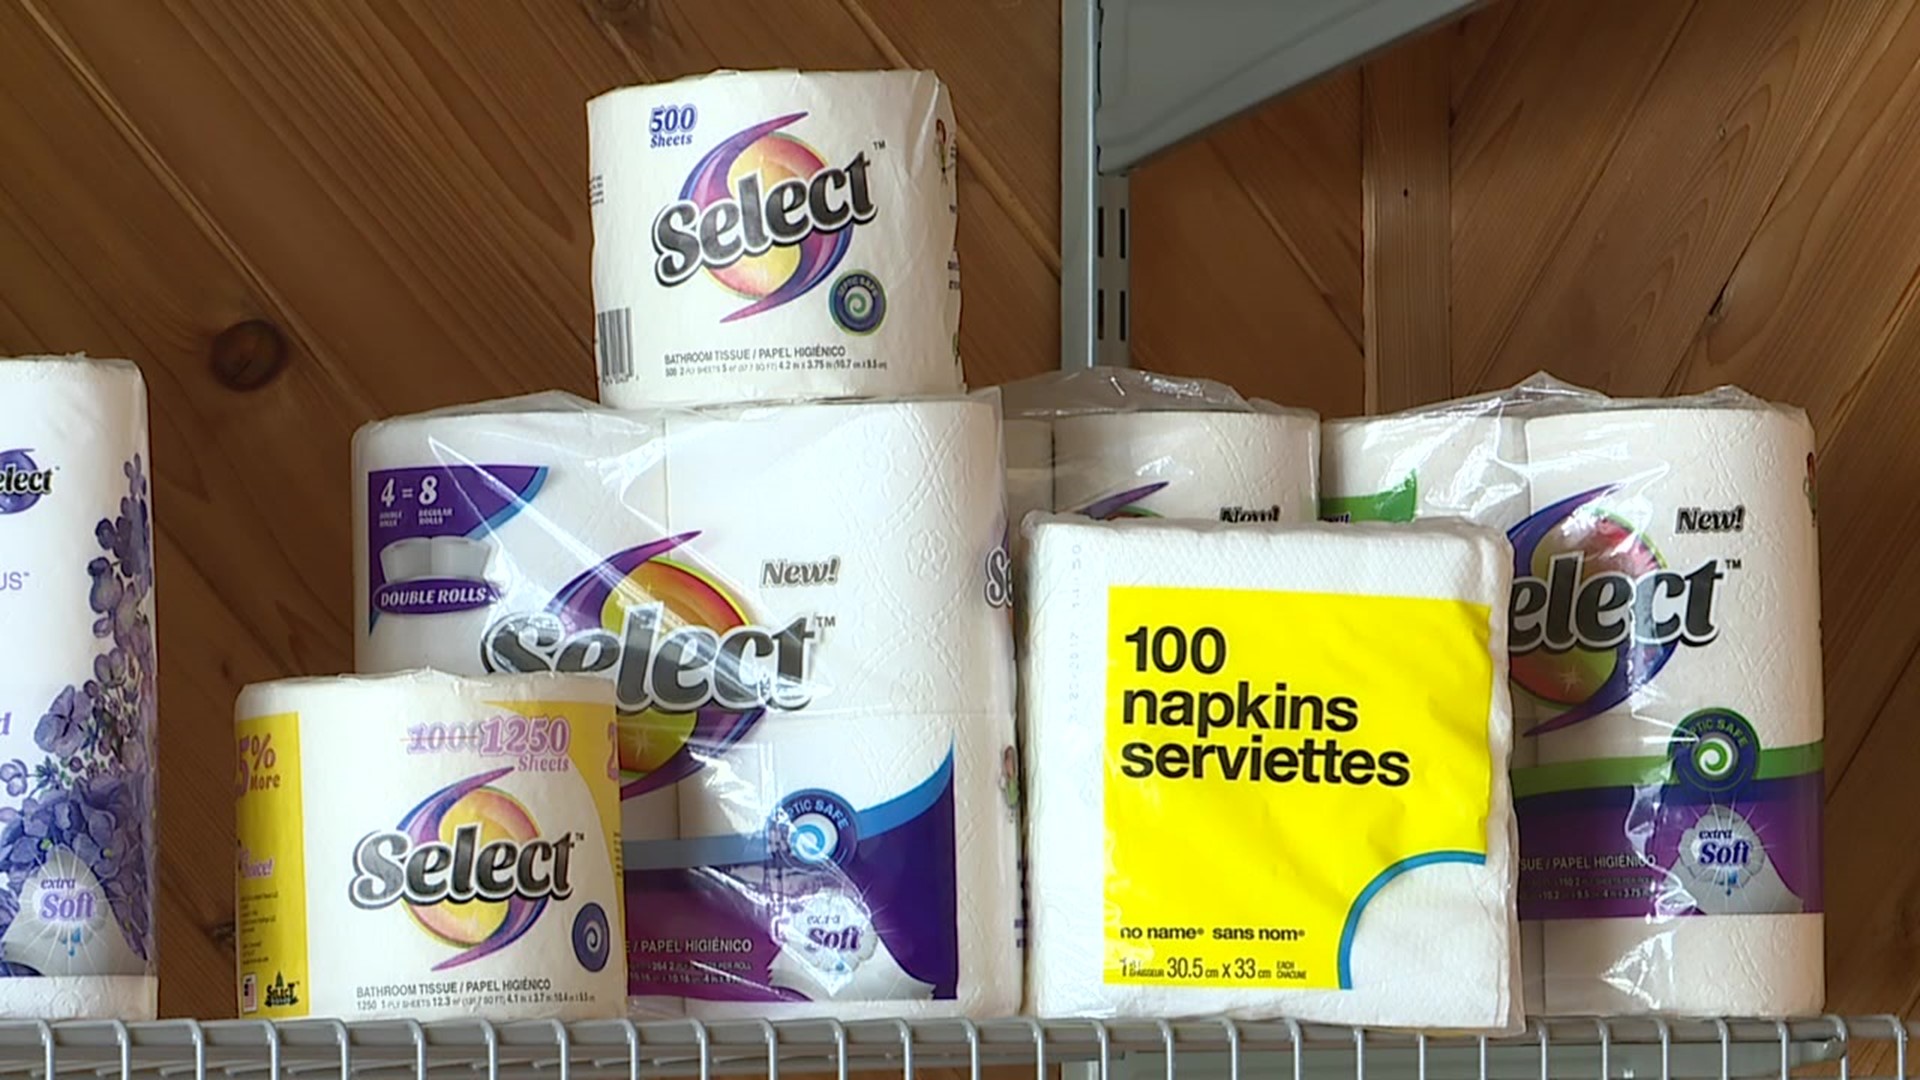 Select Tissue of Pennsylvania has a high demand for paper products that they're hiring new employees